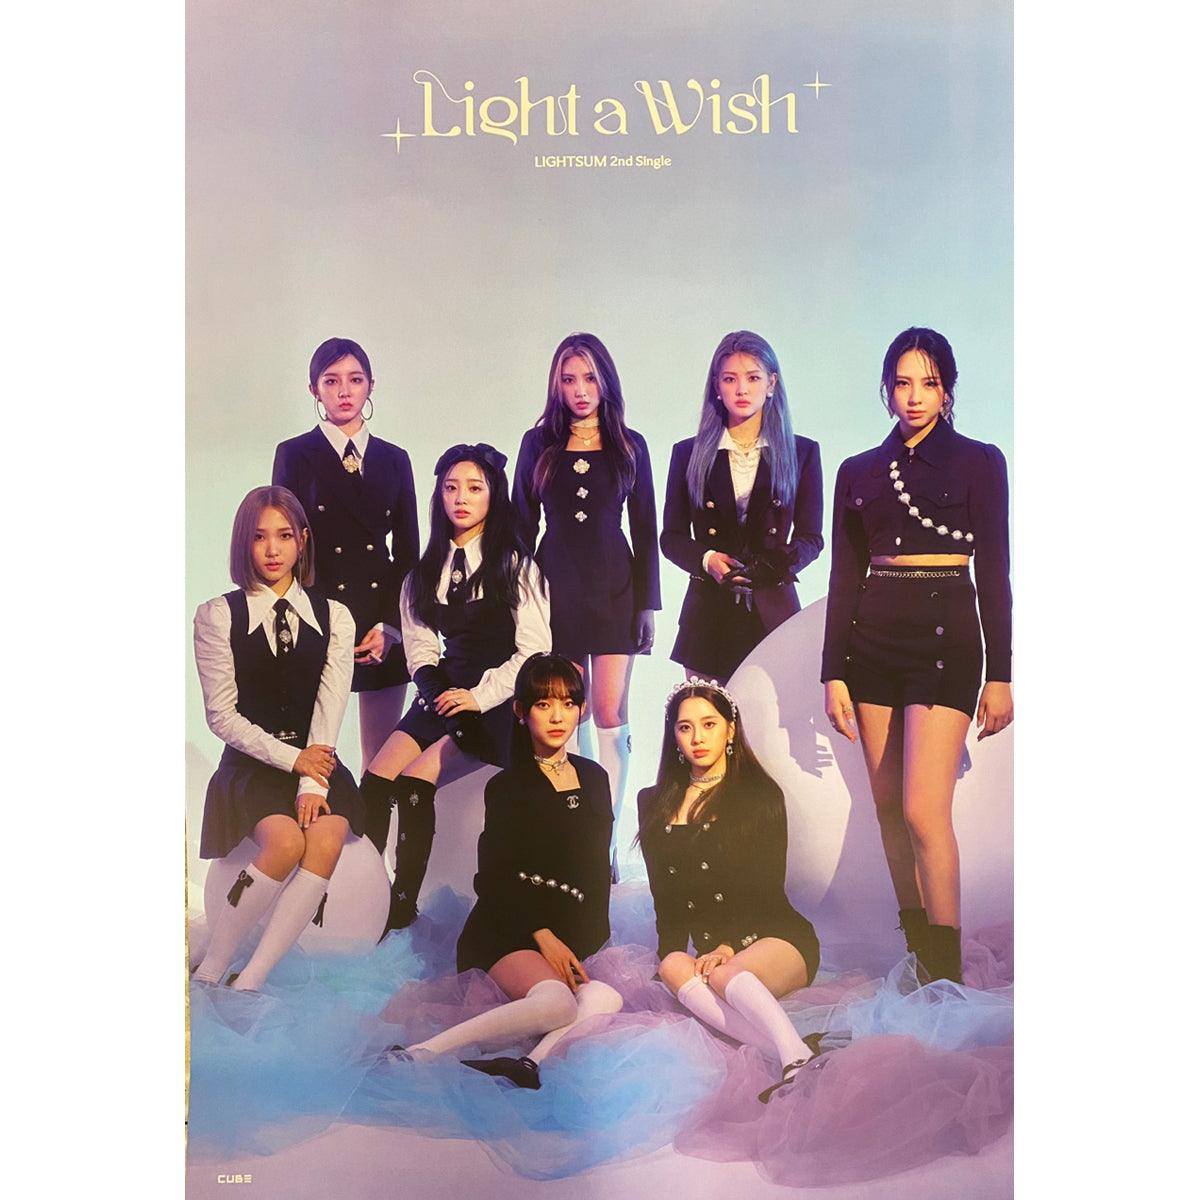 LIGHTSUM 2ND SINGLE ALBUM 'LIGHT A WISH' POSTER ONLY